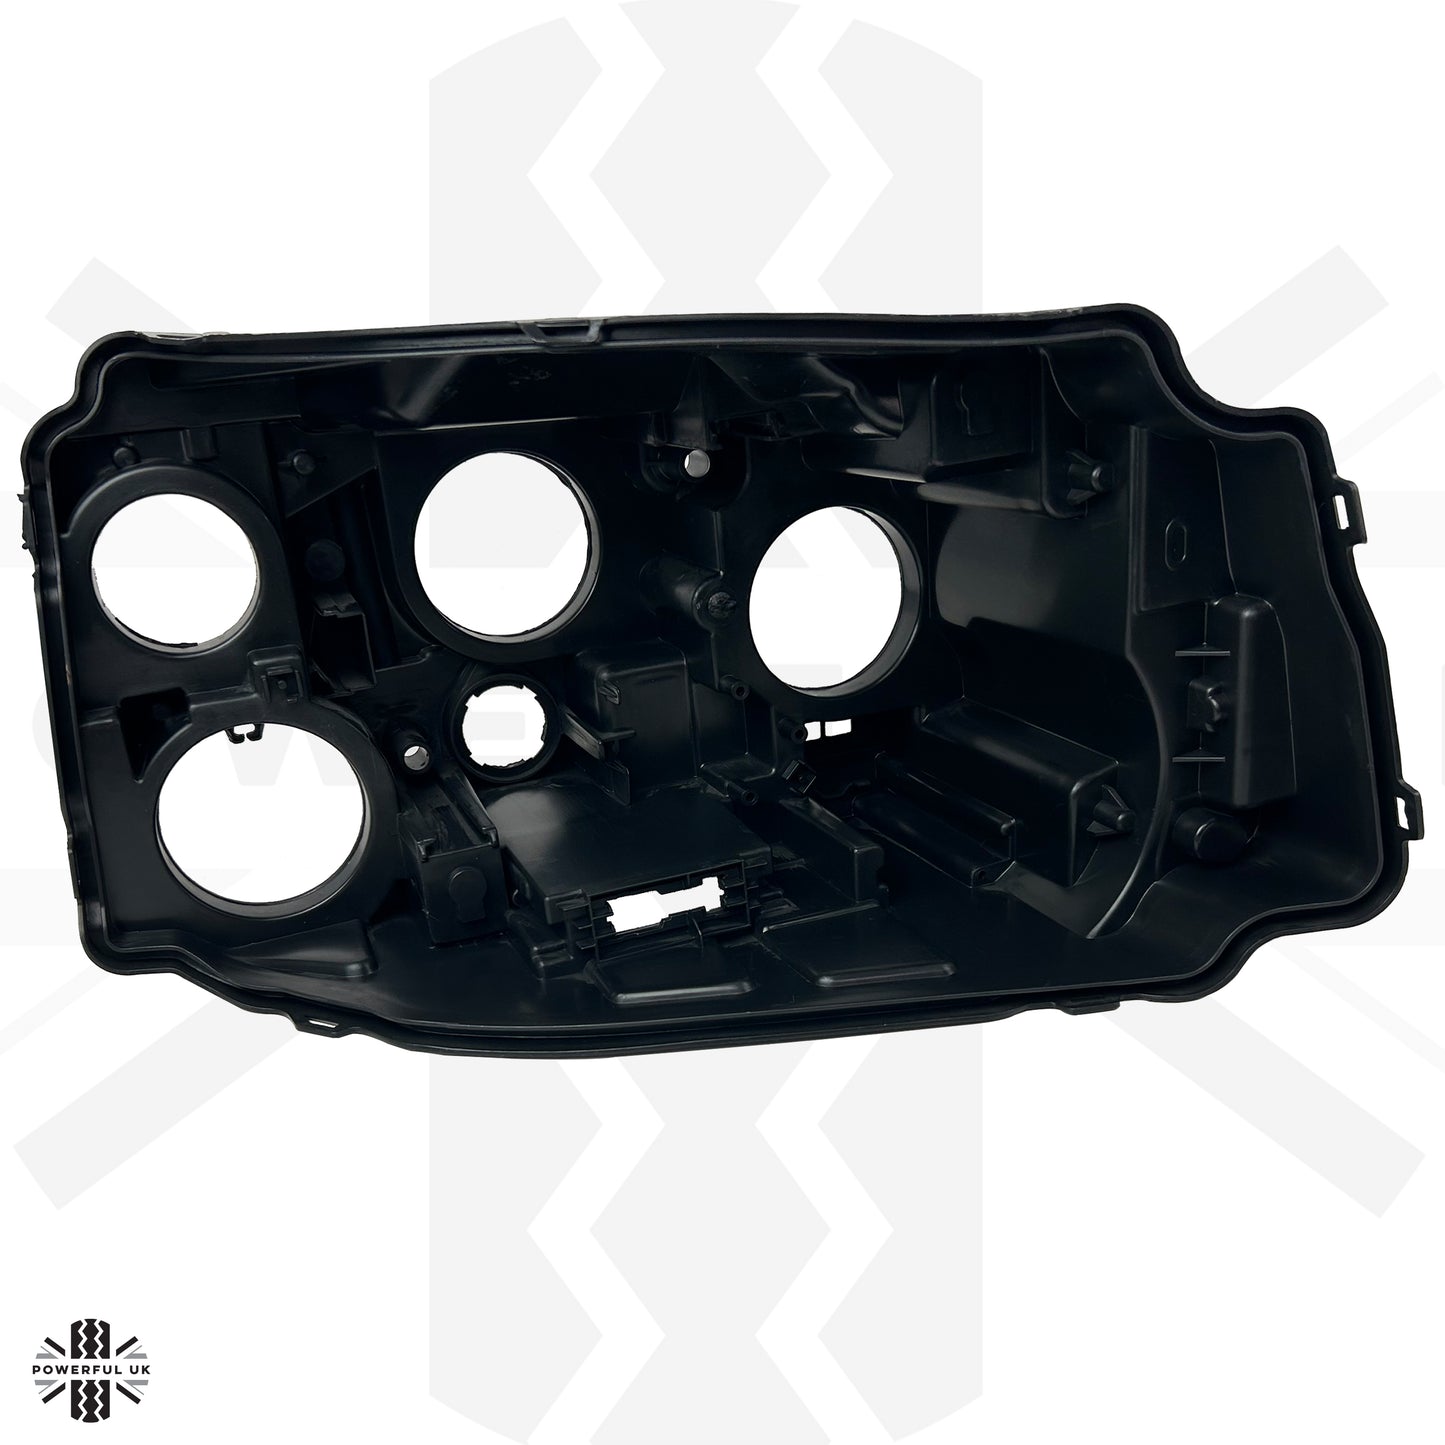 Replacement Headlight Rear Housing for Range Rover Sport L320 2010-13 - RH